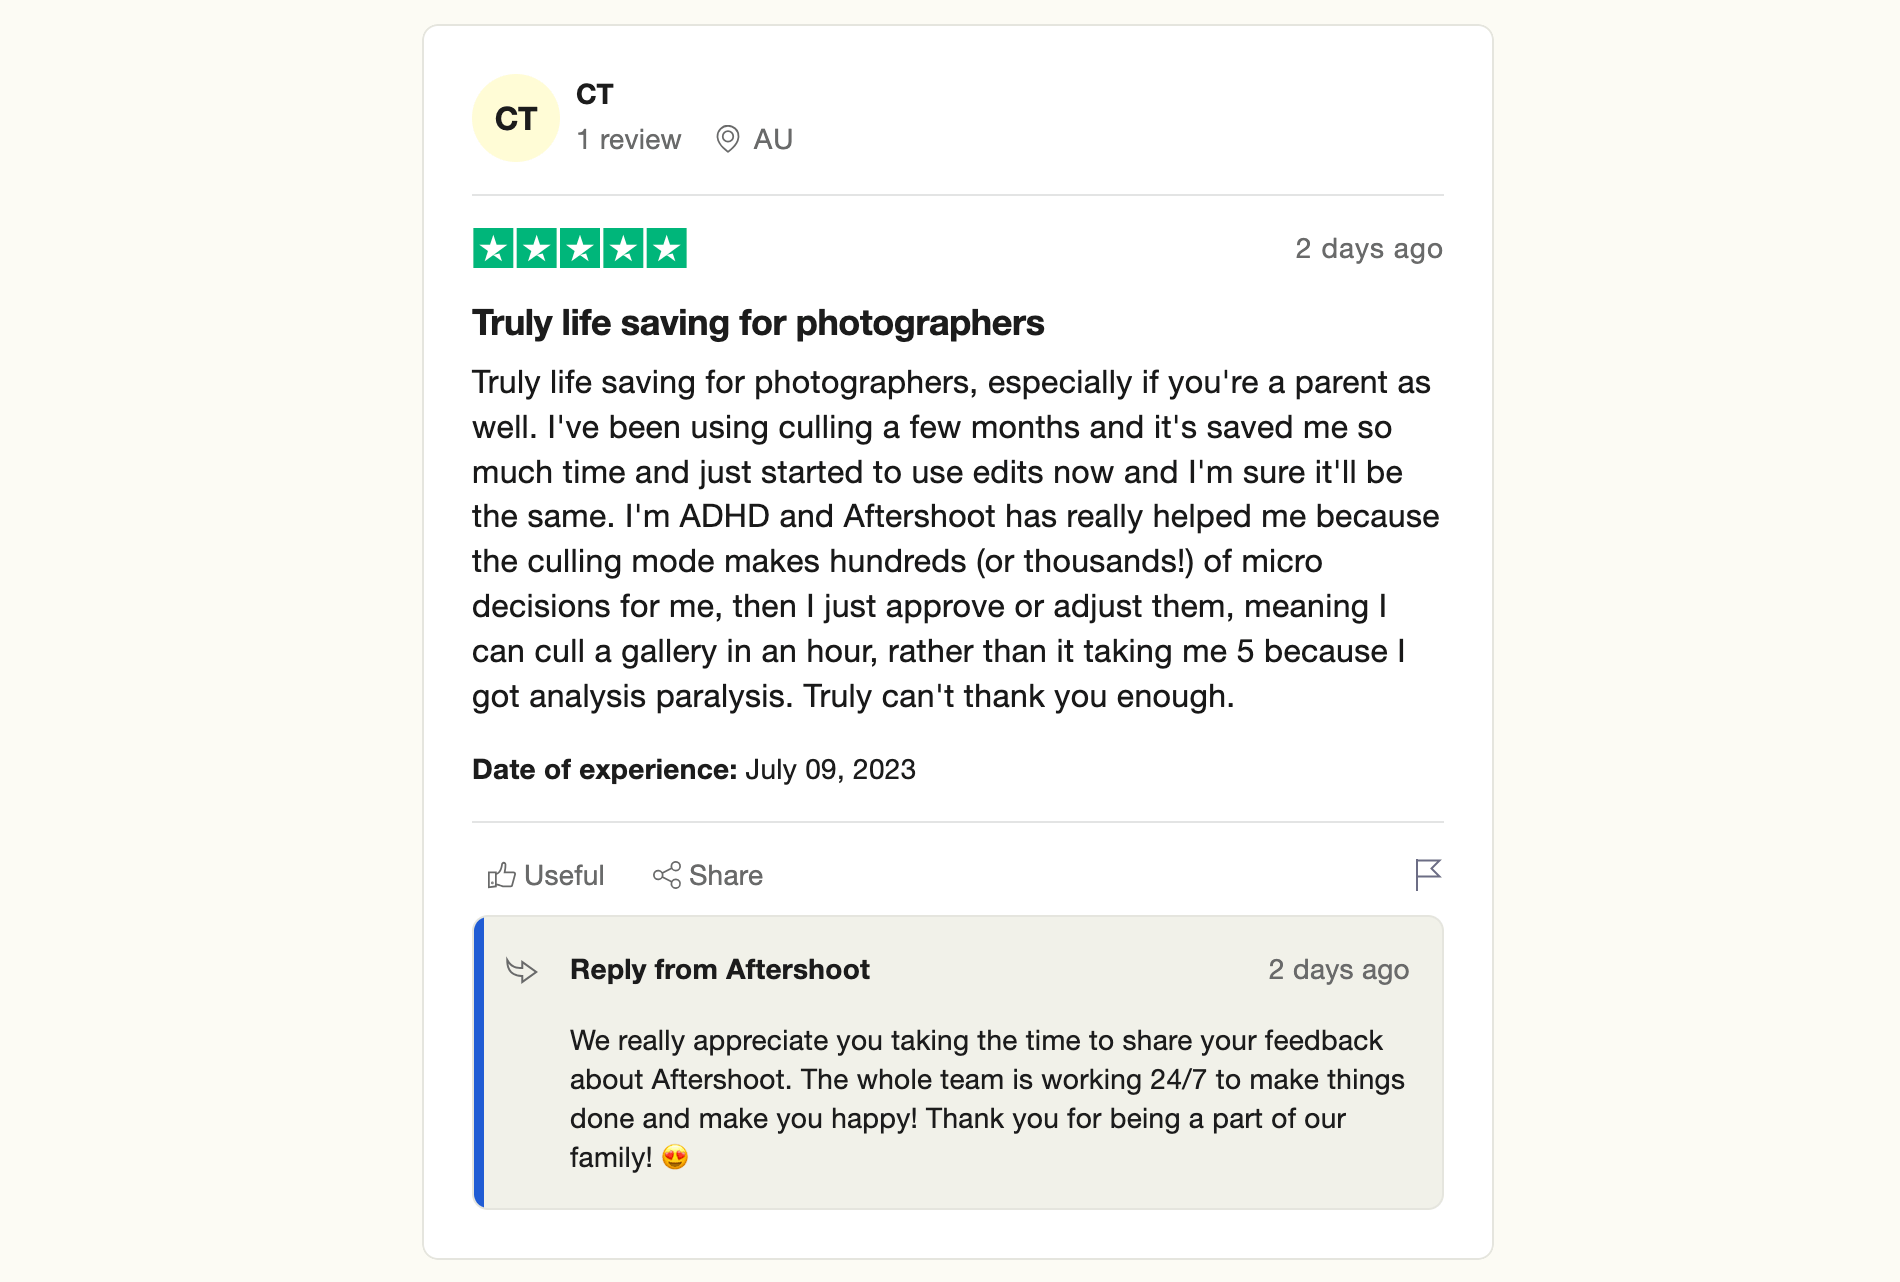 Aftershoot review from Trustpilot